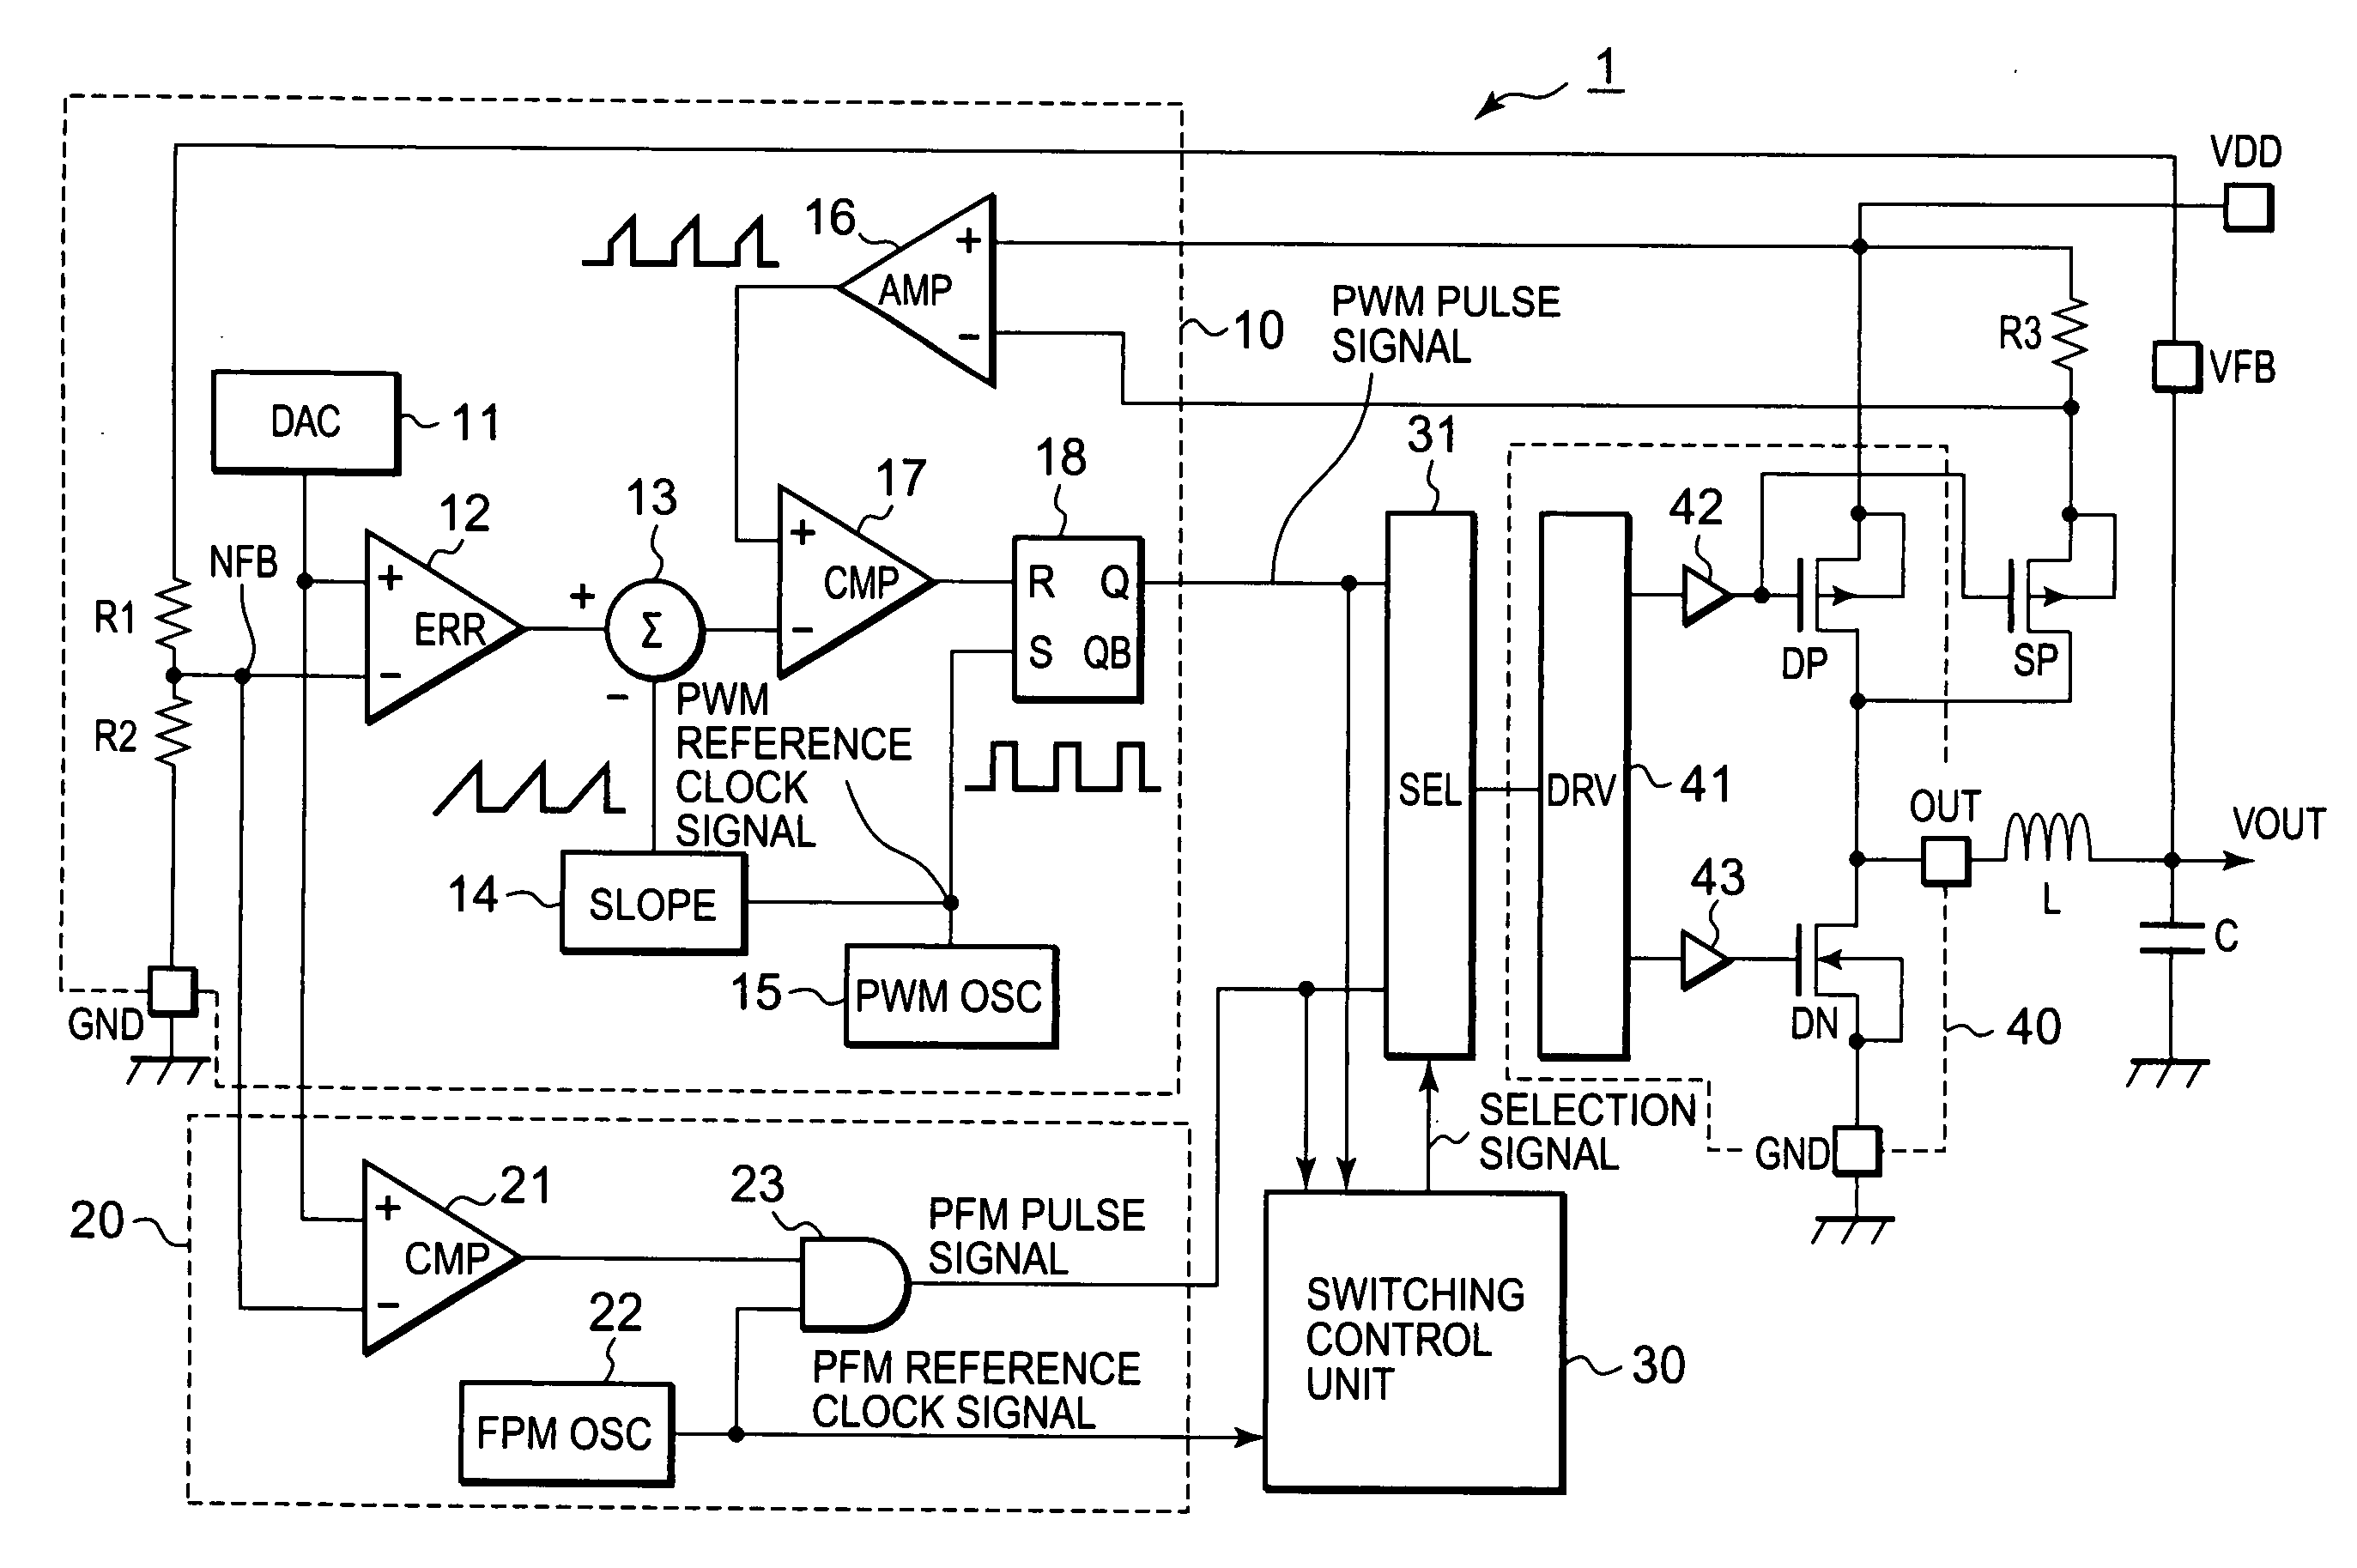 DC converter which has switching control unit to select PWM signal or PFM signal